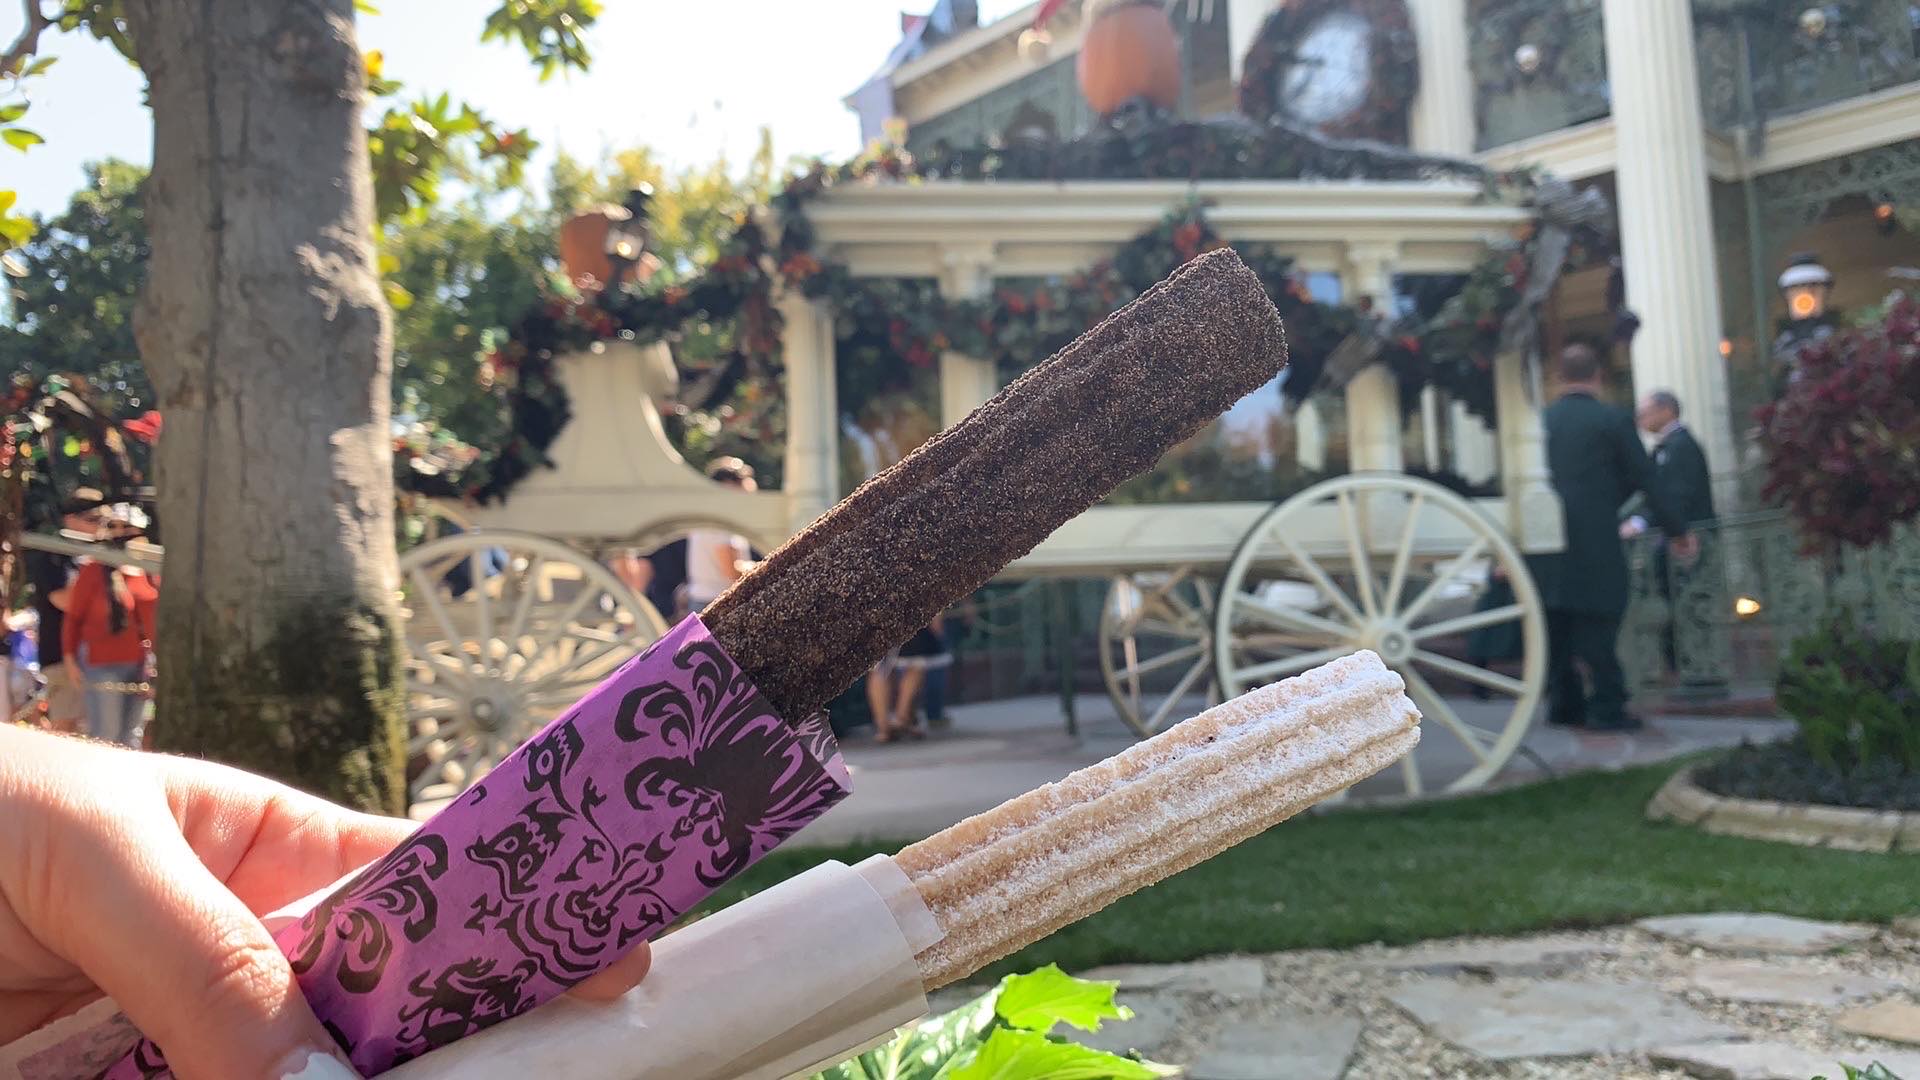 Bride and Groom Churros are a Chillingly Tempting Snack near Disneyland’s Haunted Mansion